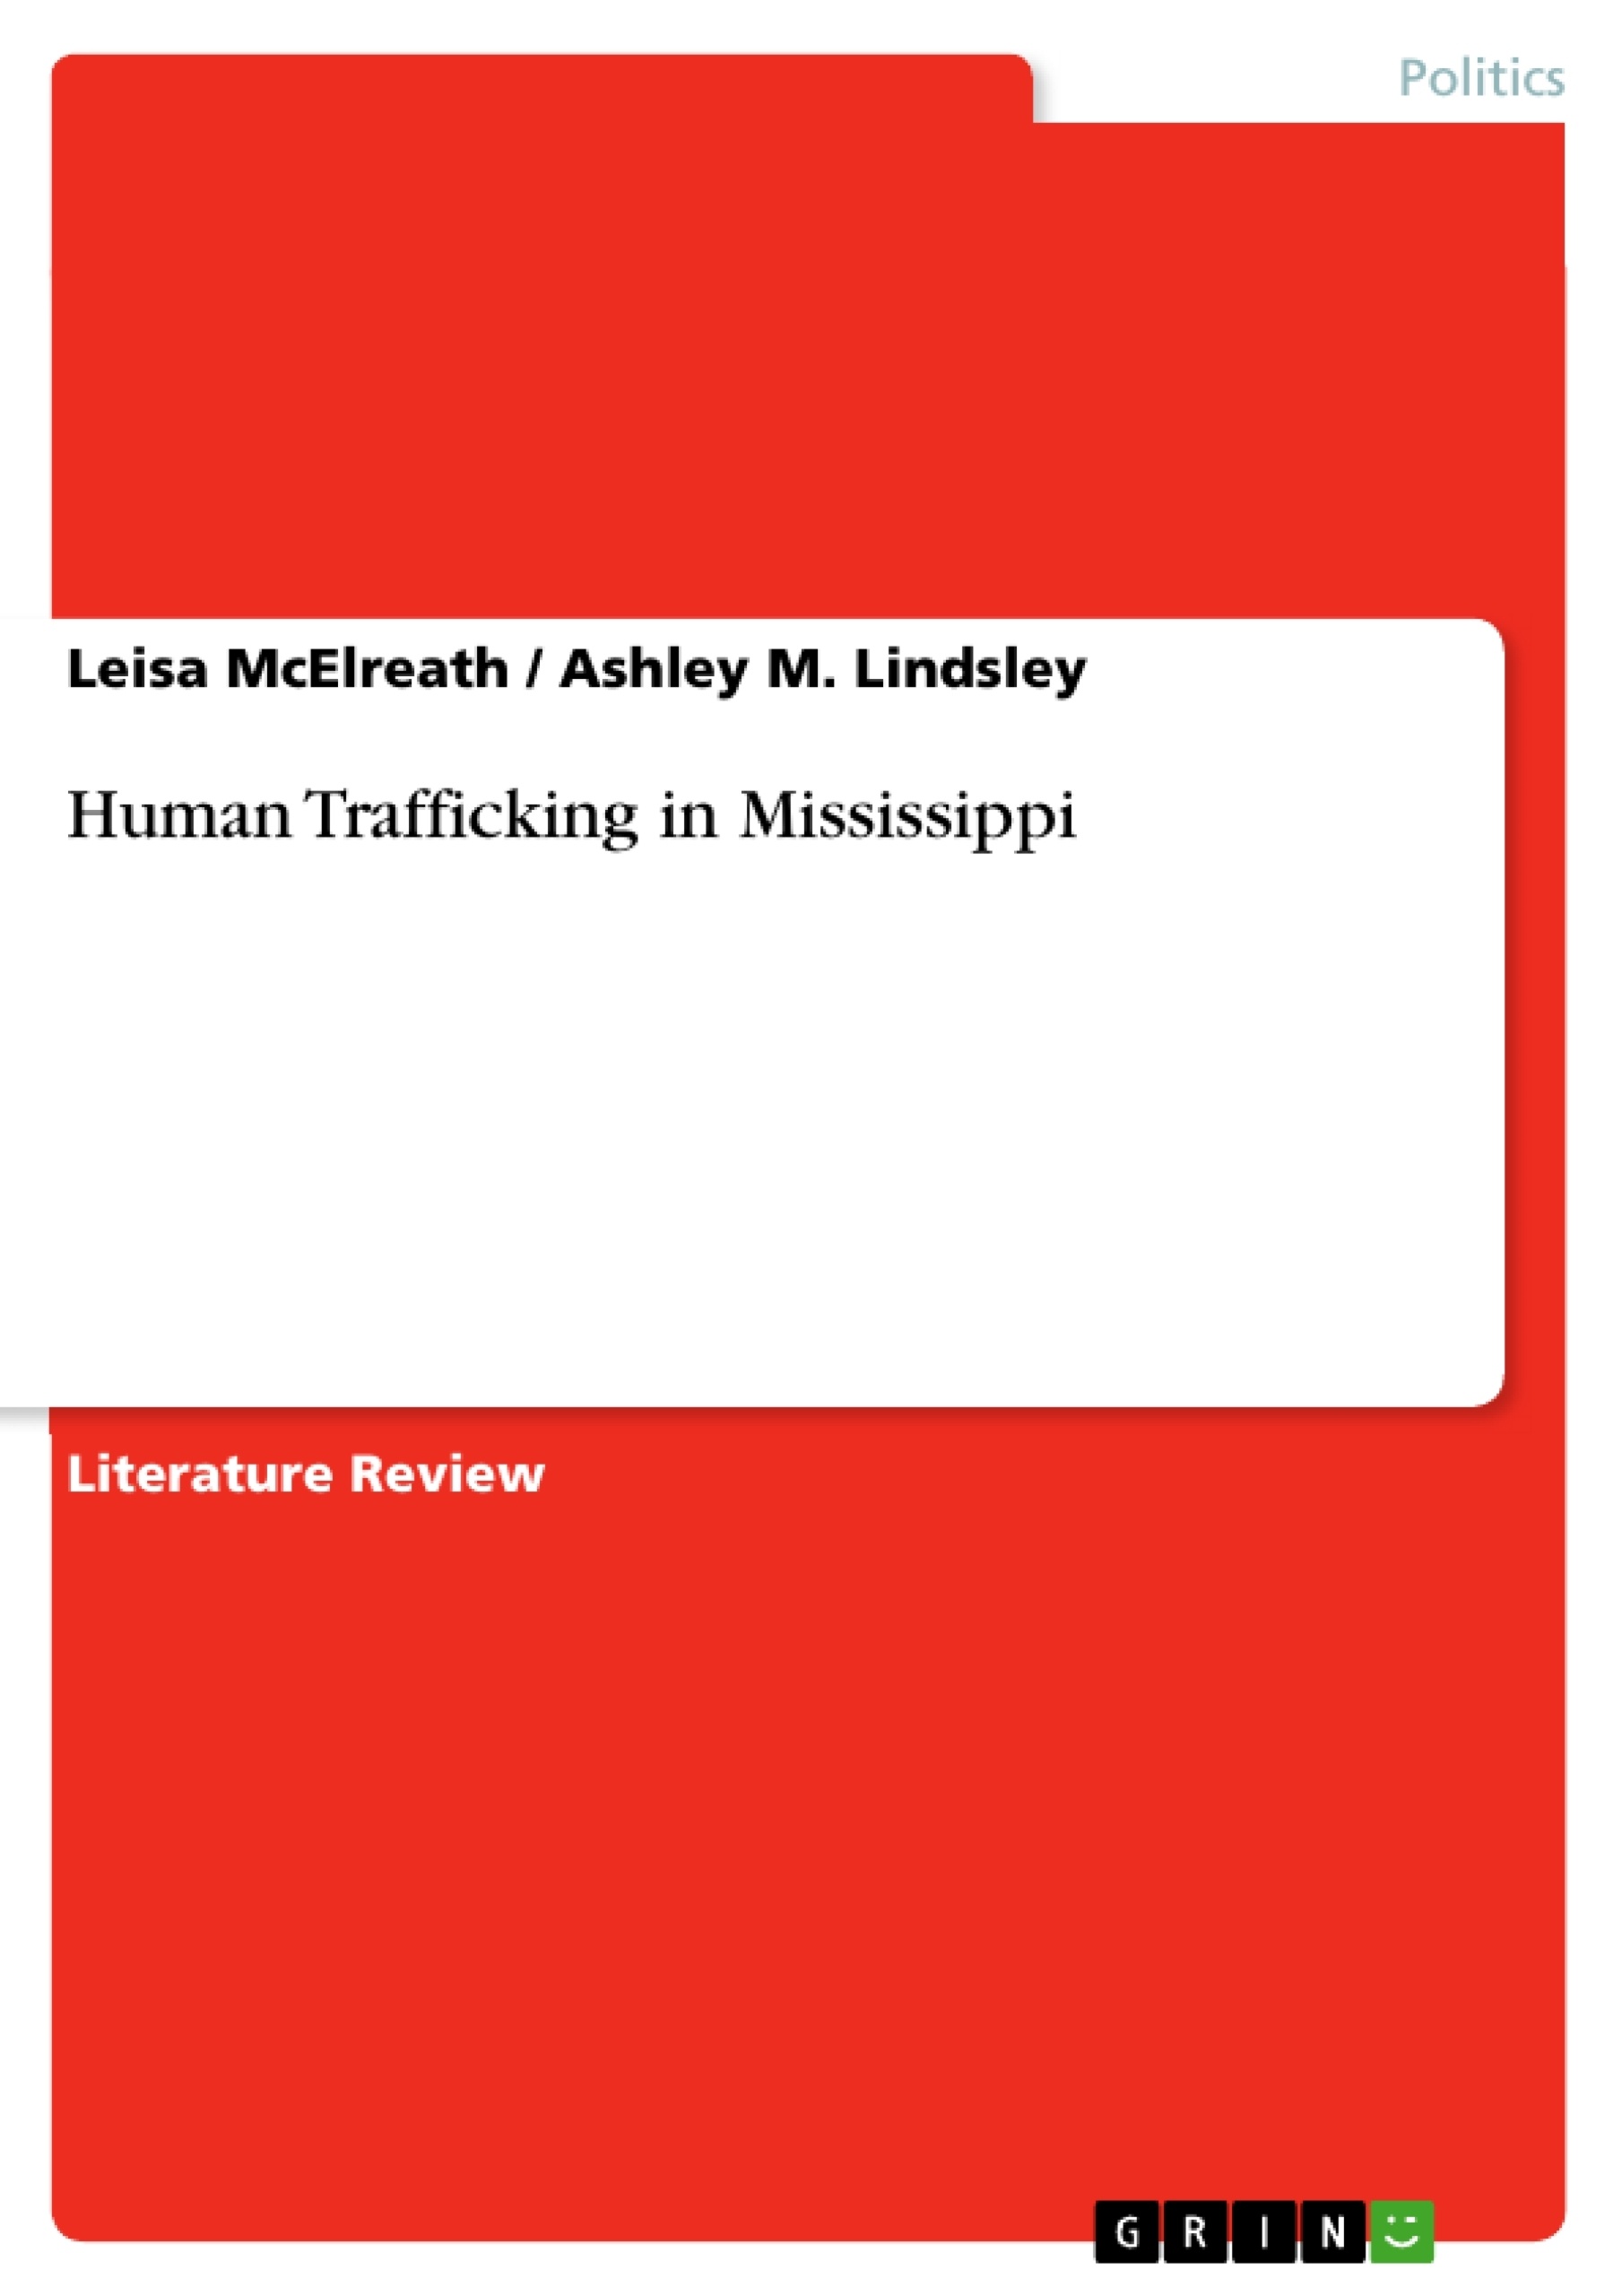 Title: Human Trafficking in Mississippi